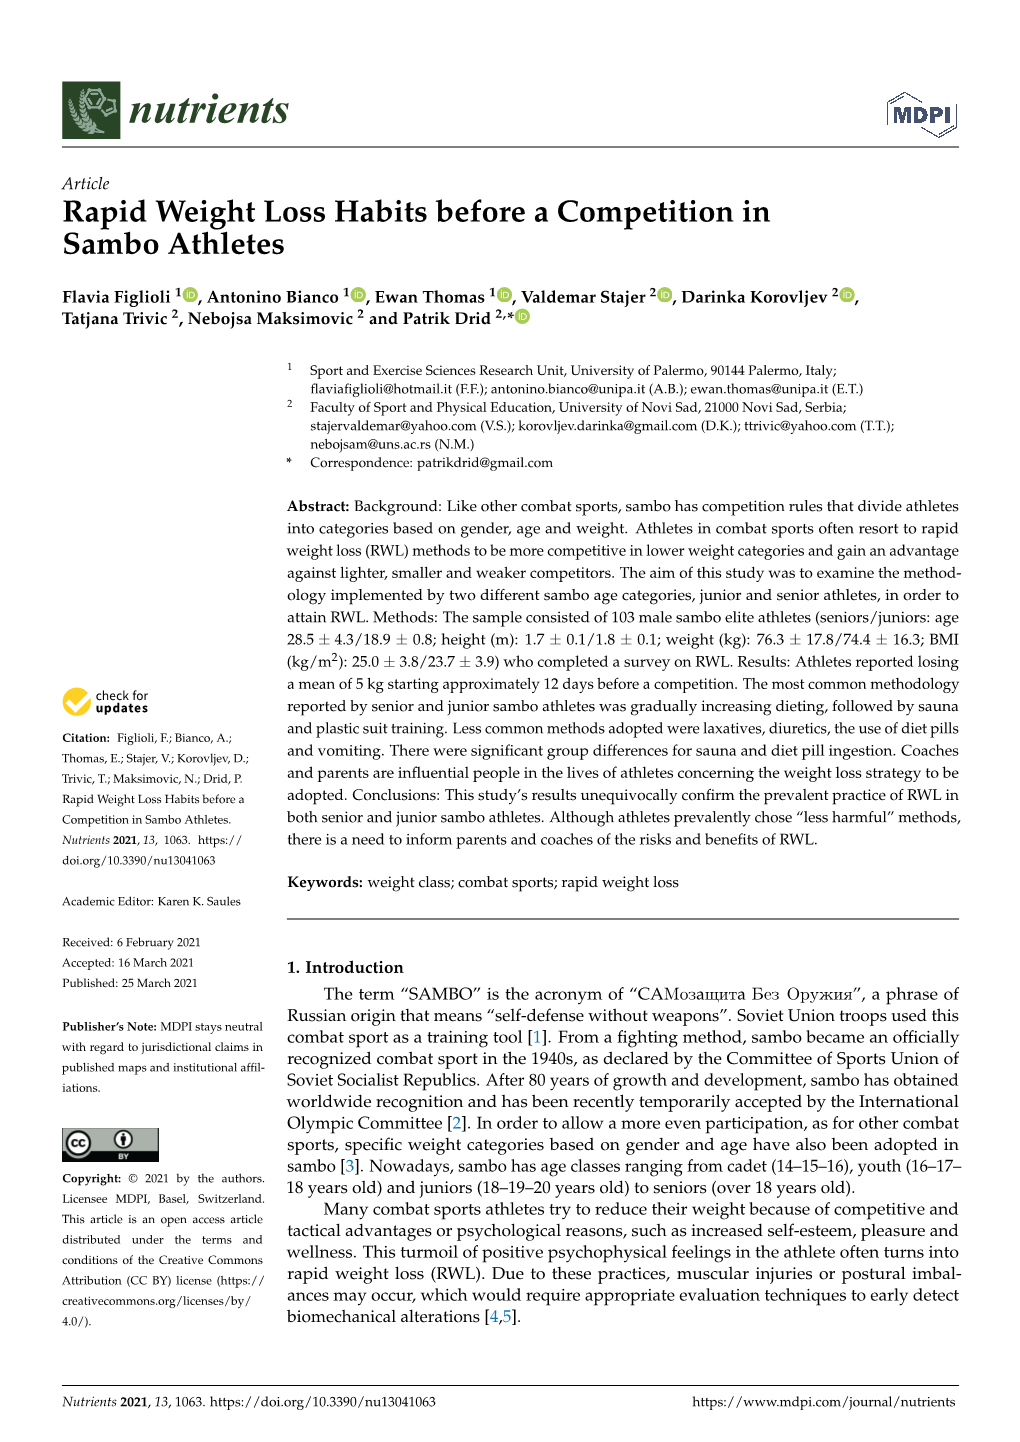 Rapid Weight Loss Habits Before a Competition in Sambo Athletes